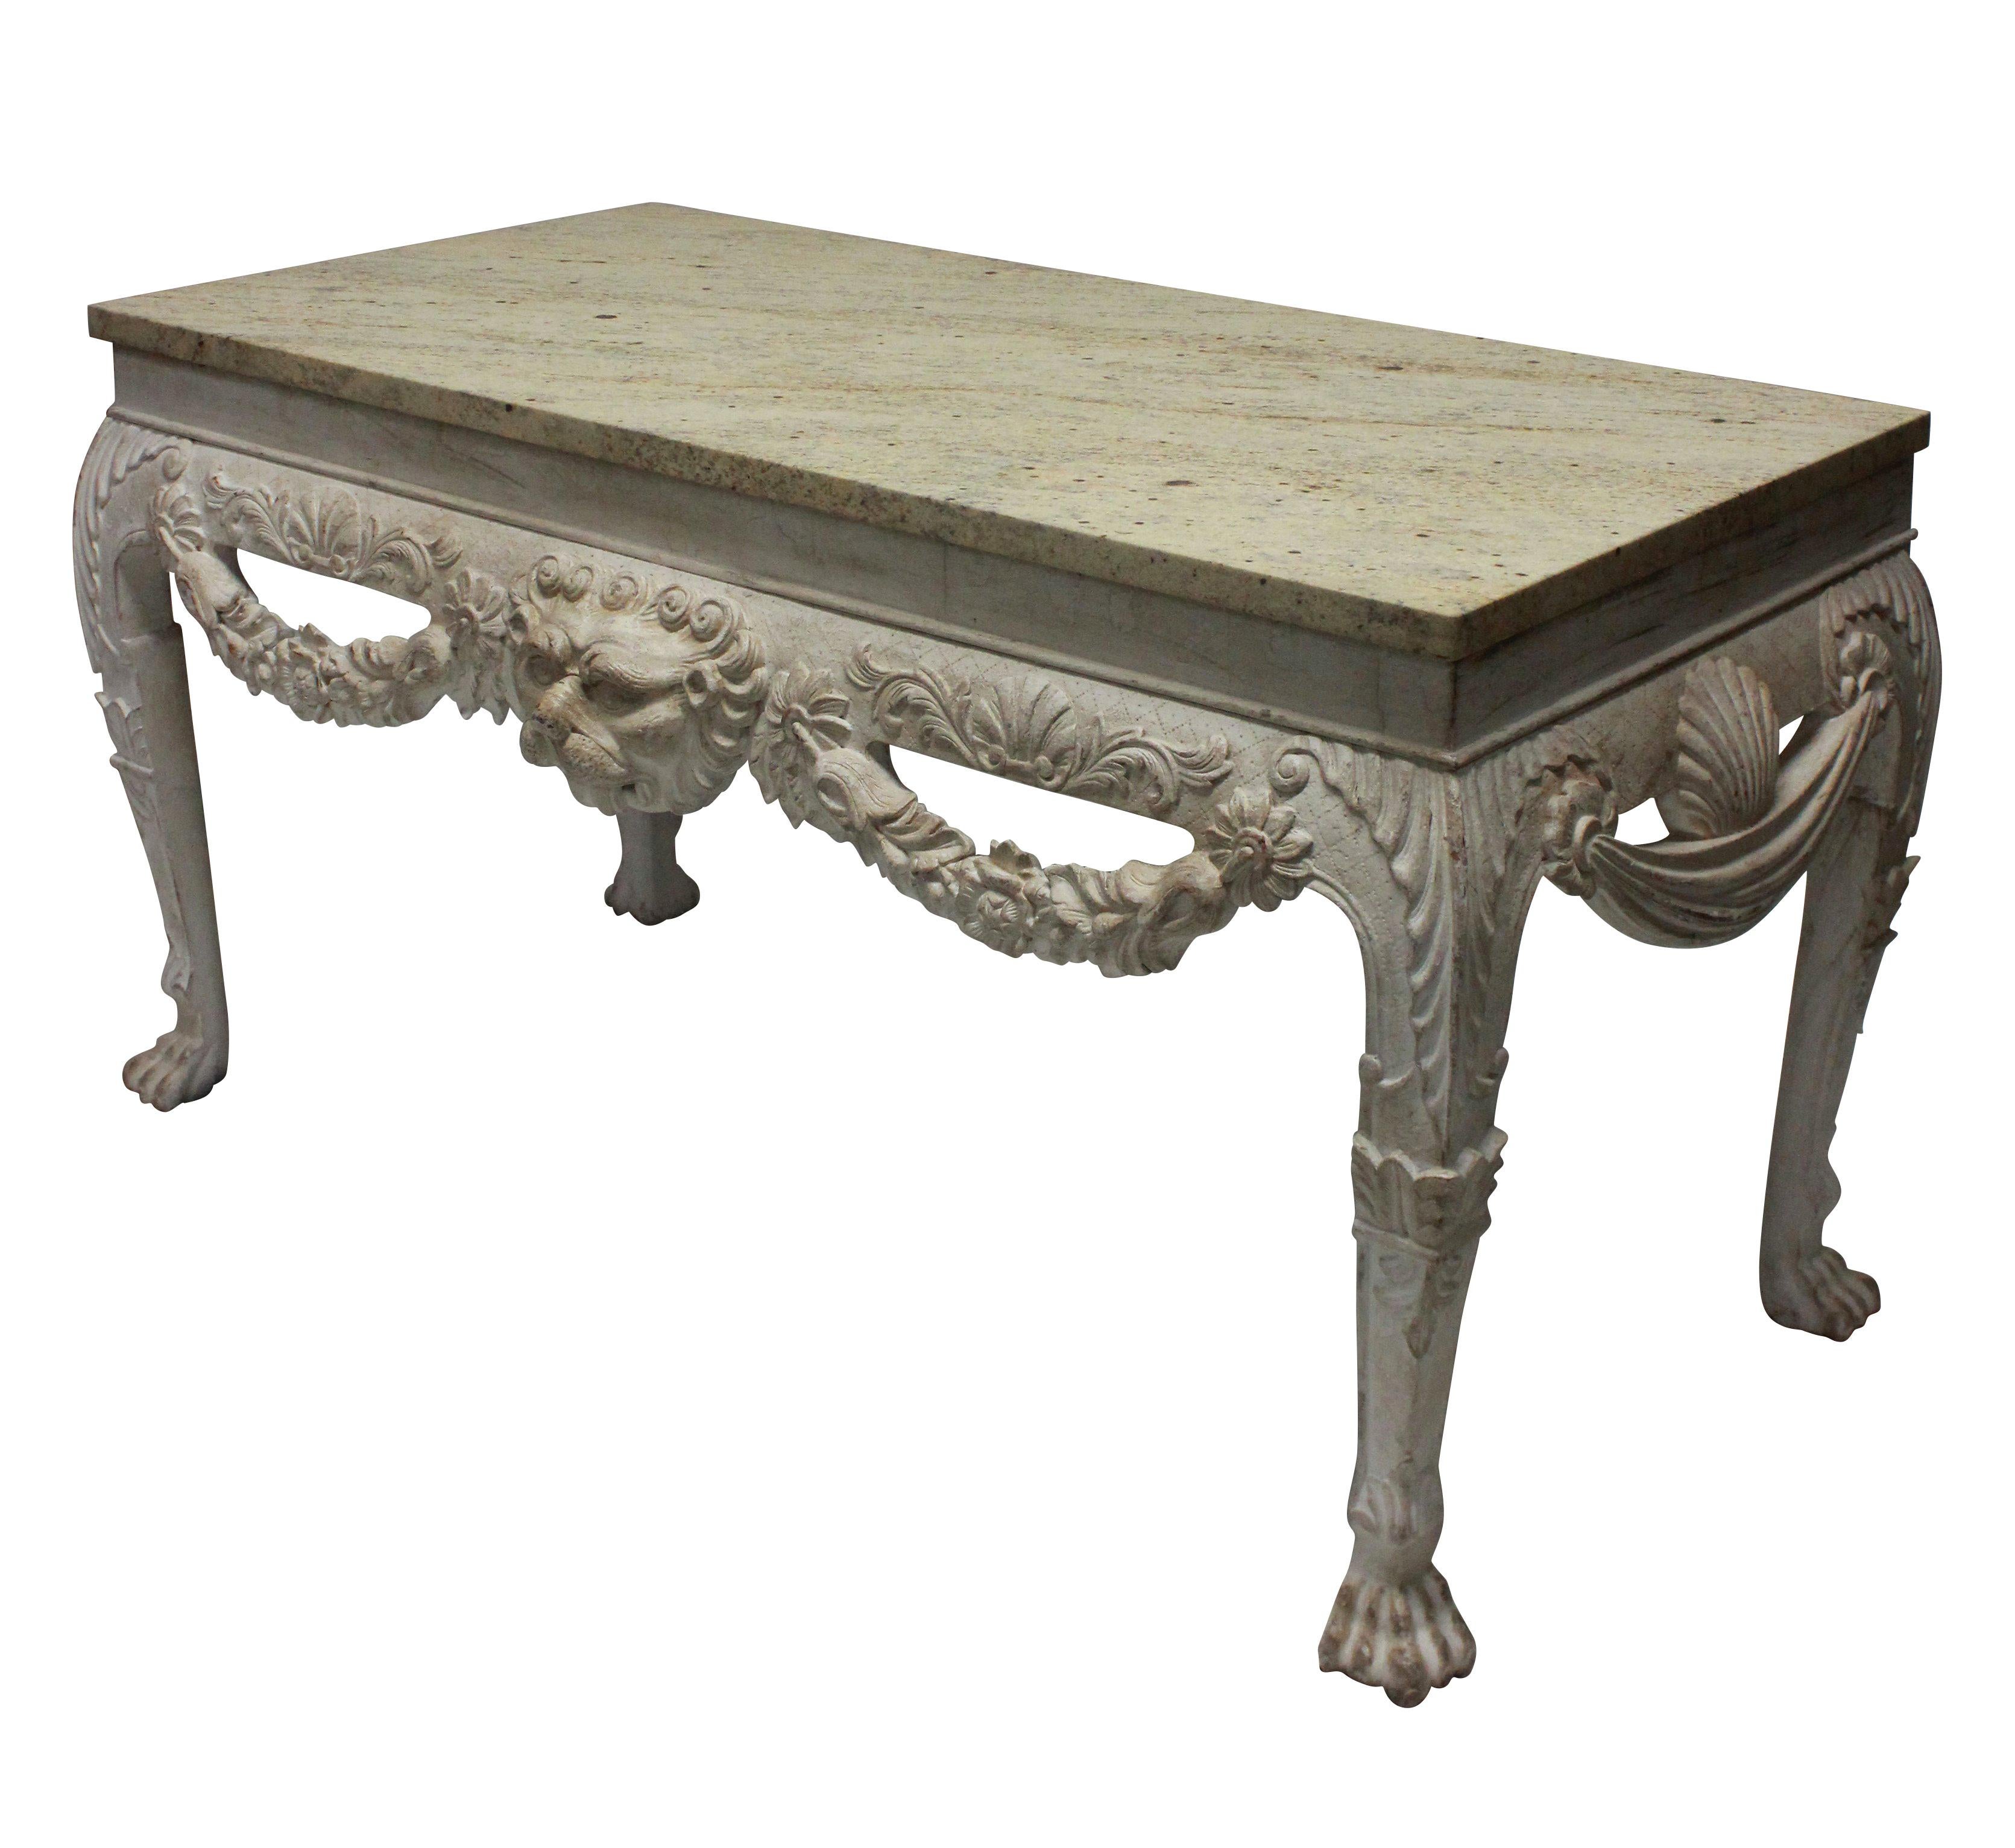 A large pair of English Country House console tables in the 18th century manner, with lion masks, swags and acanthus carvings. Distressed painted mahogany with stone coloured marble tops.

 